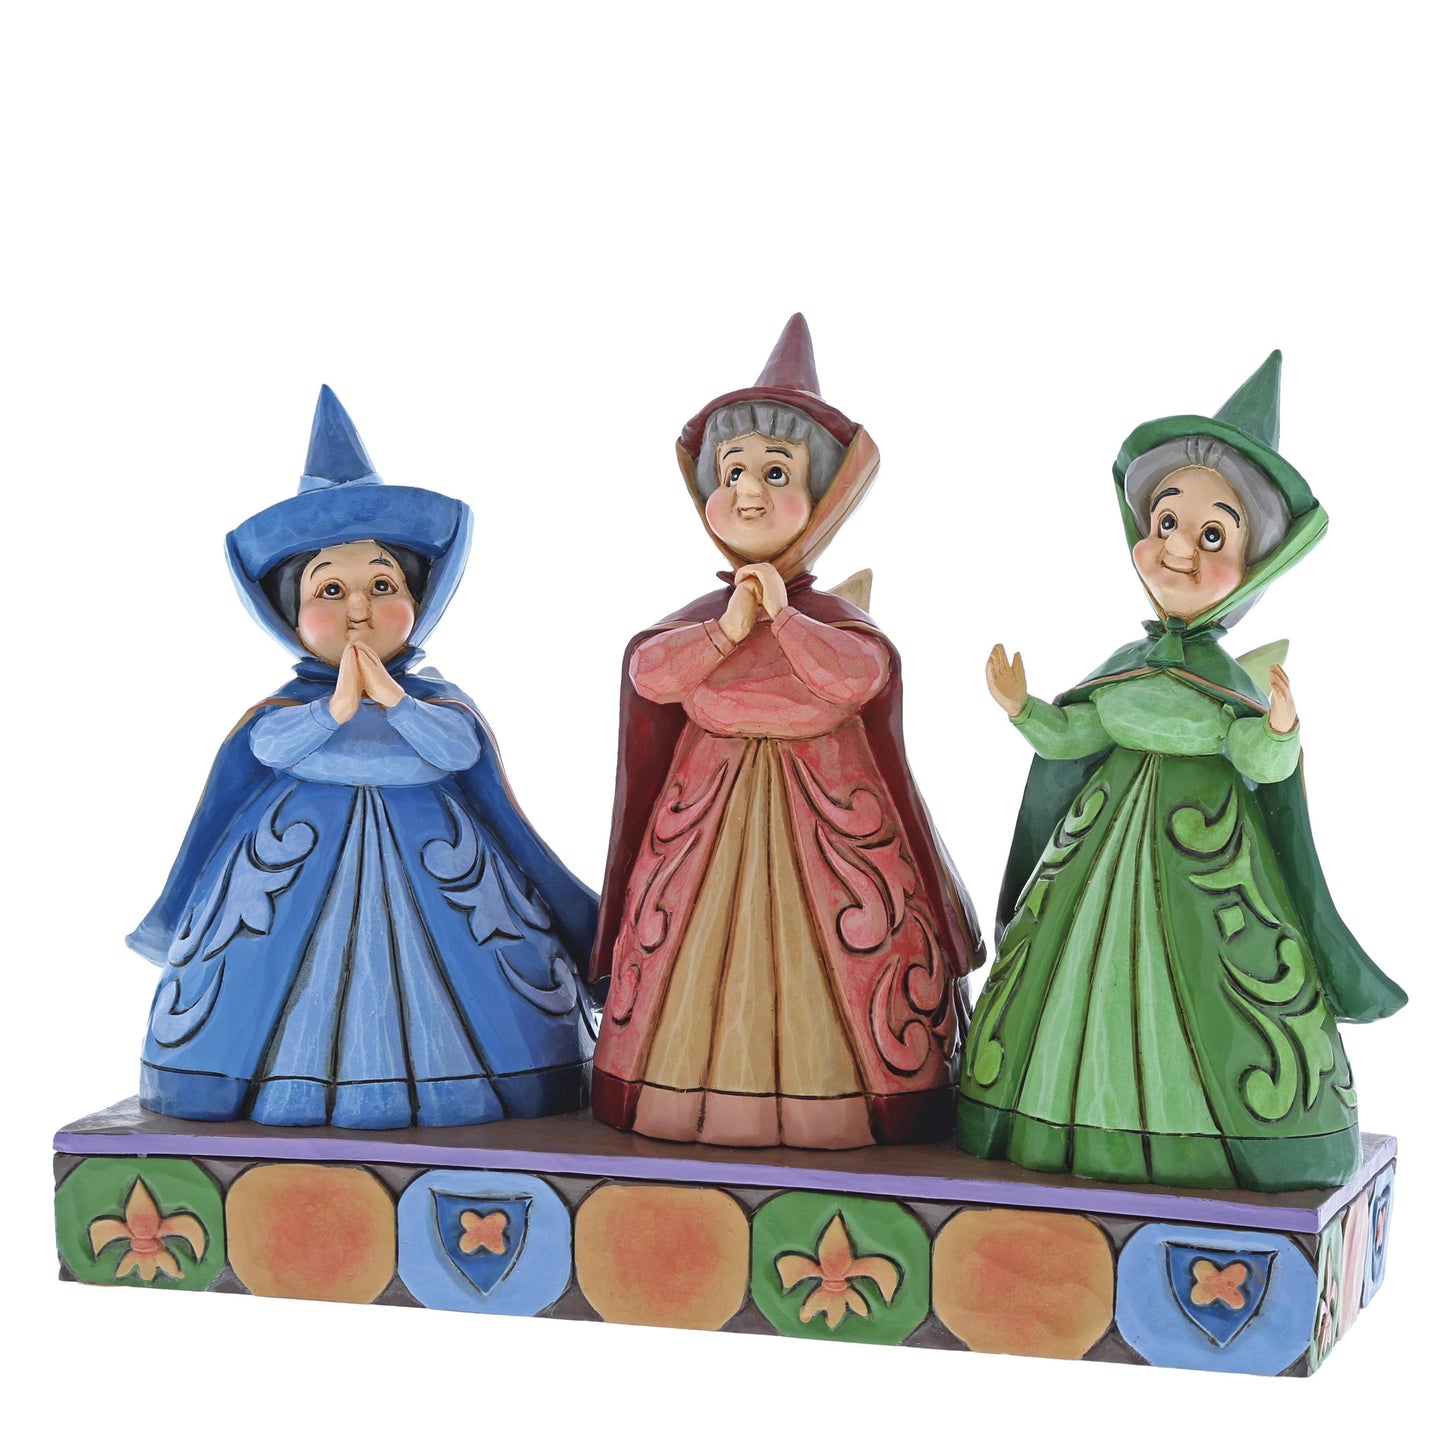 Royal Guests (Three Fairies) (Disney Traditions by Jim Shore) - Gallery Gifts Online 